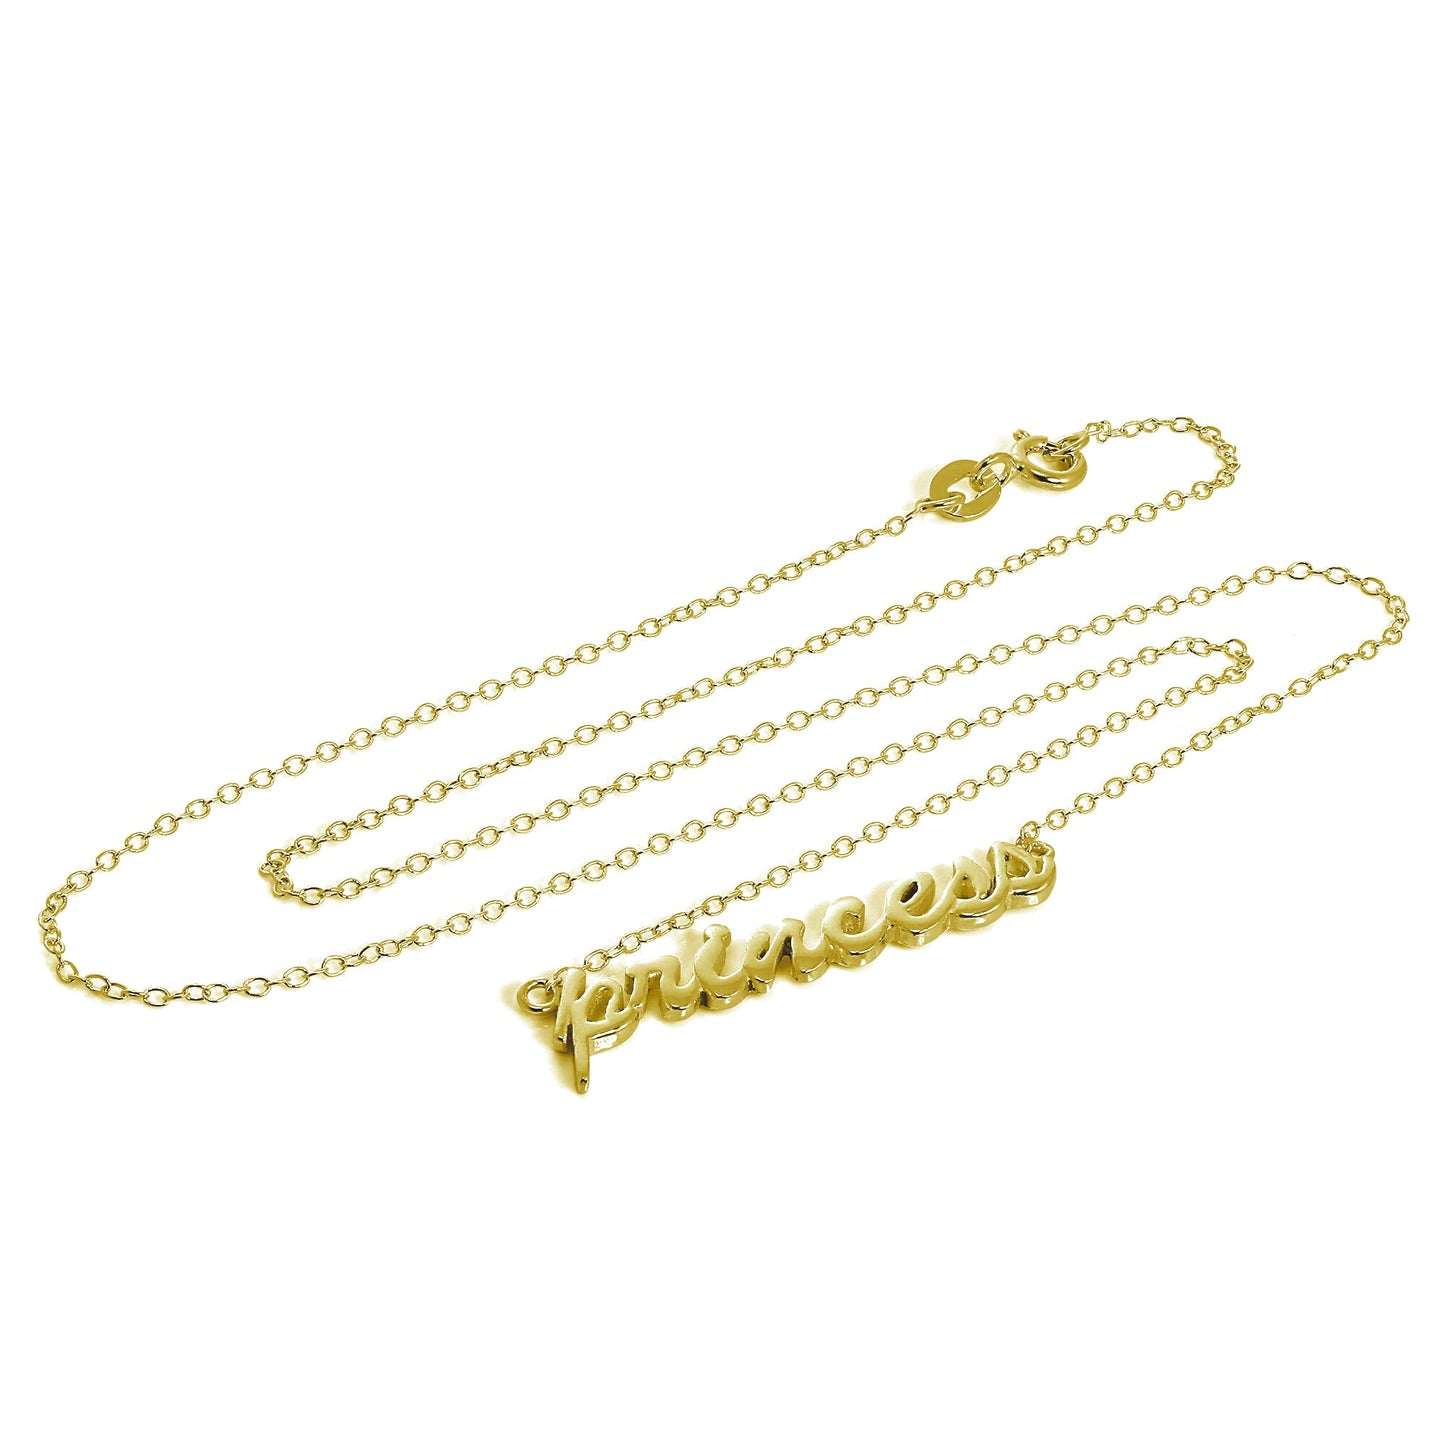 Gold Plated Sterling Silver Princess Necklace 16 Inches